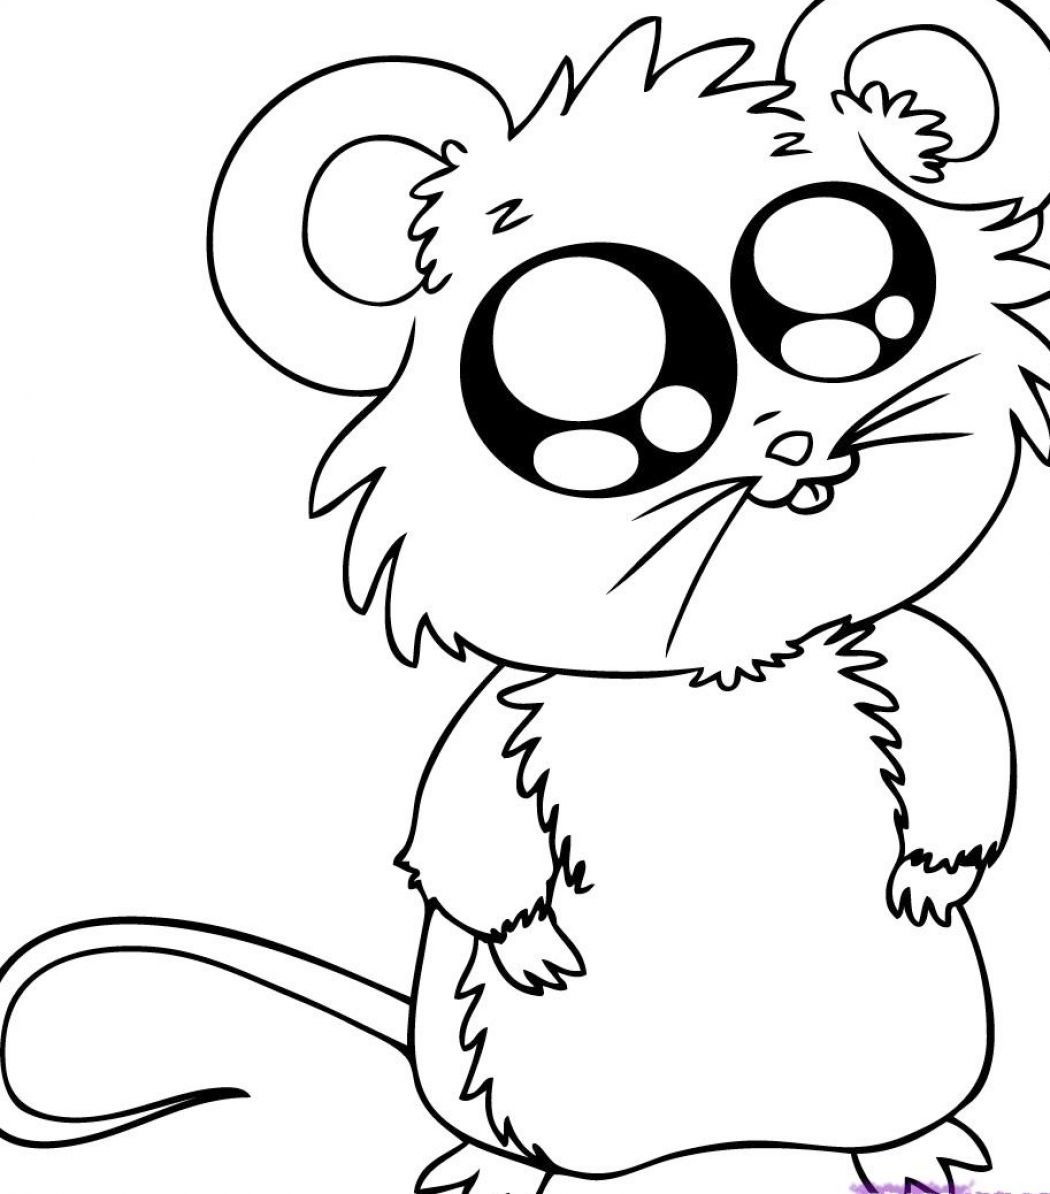 Big Eyed Animal   Coloring Pages For Kids And For Adults ...